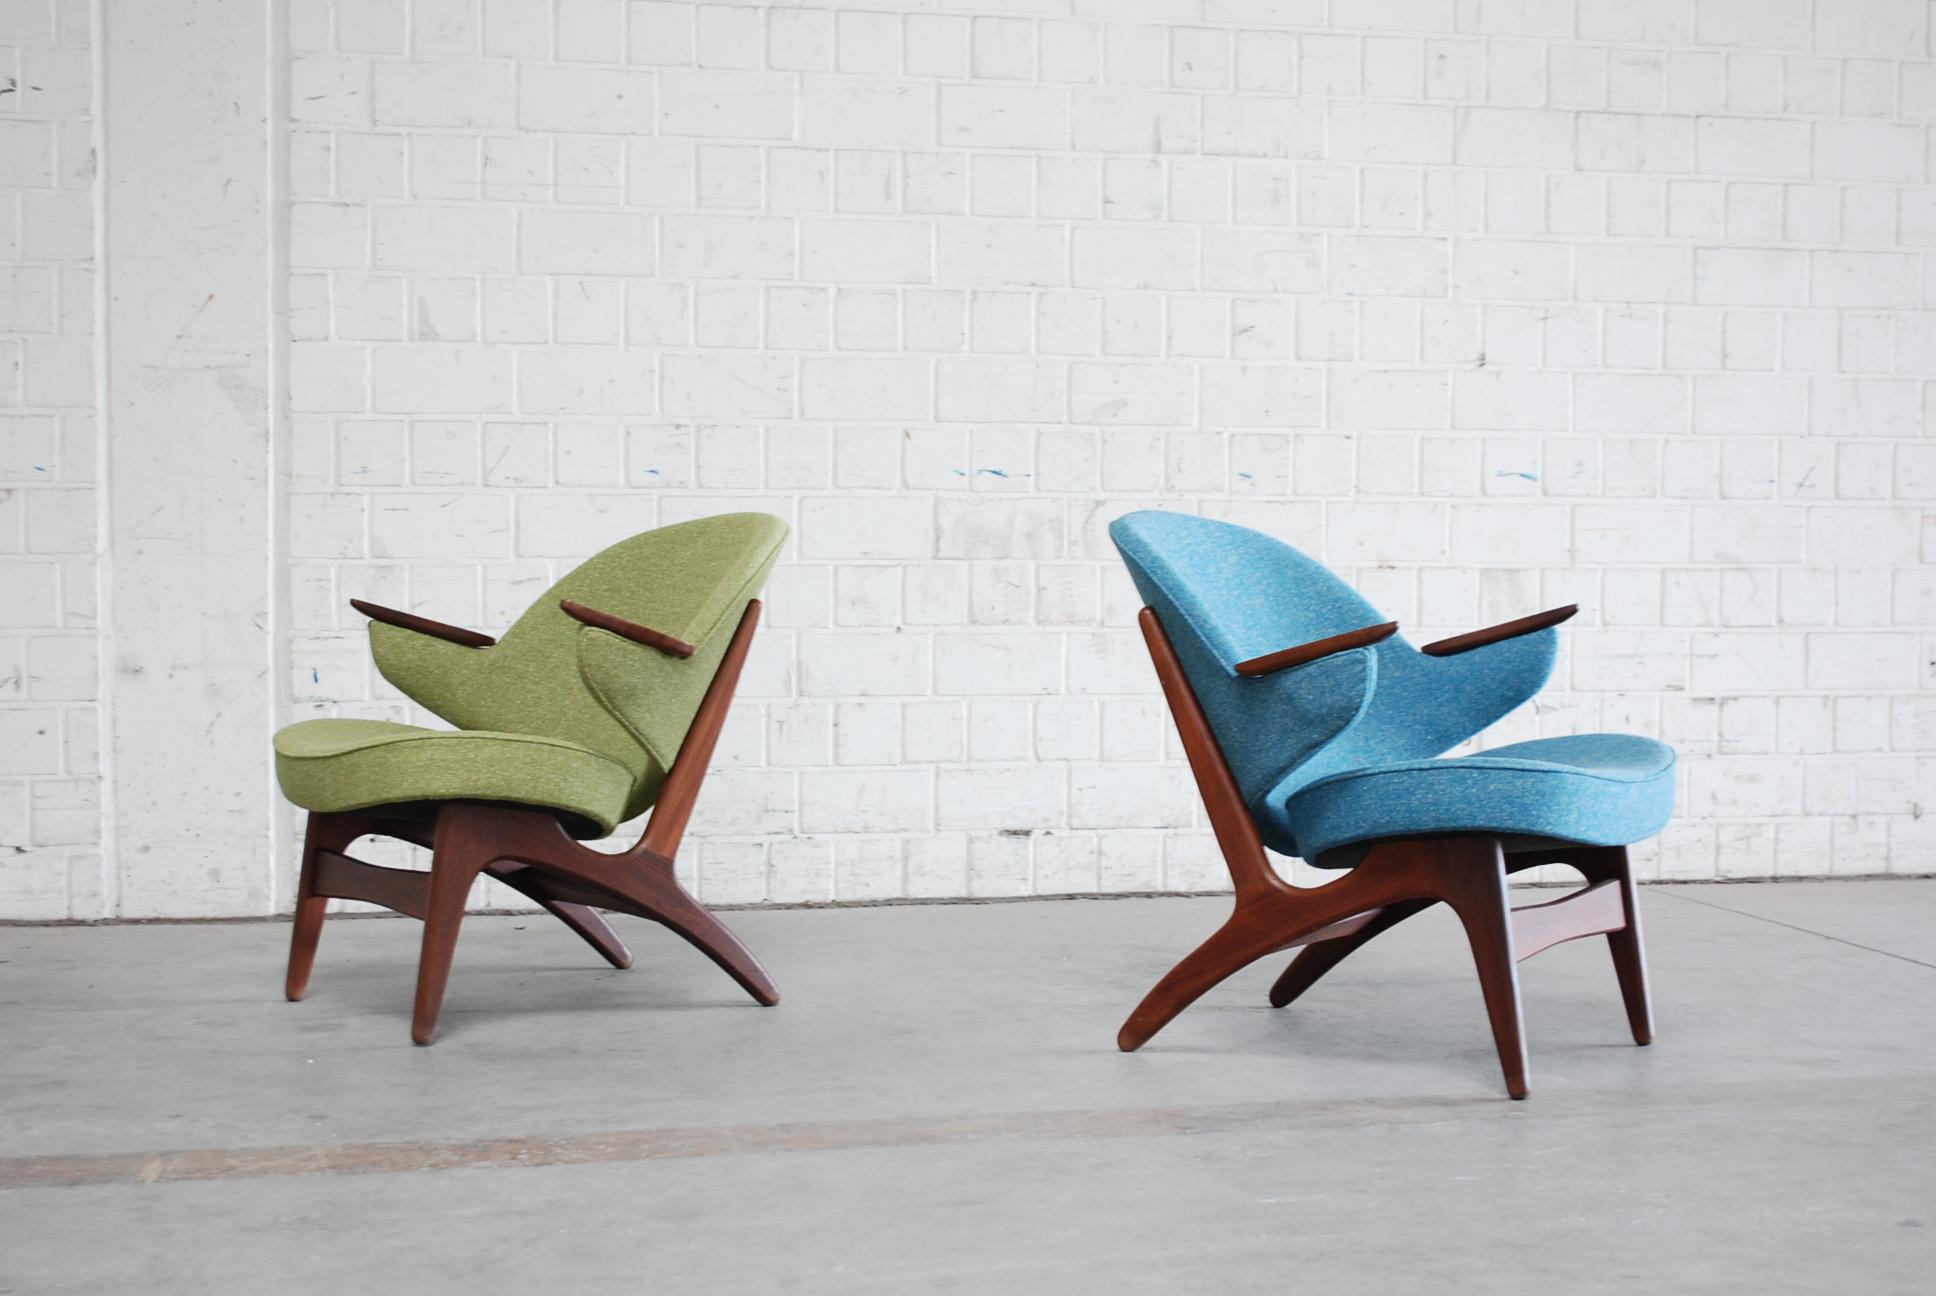 A pair of easy chairs in petrol and green design by Carl Edward Matthes Modell 33 ind Teak wood.
The Chair was completely restored and upholstered new in 2 different colours.
The fabric is made of a high quality hemp fabric in green and petrol